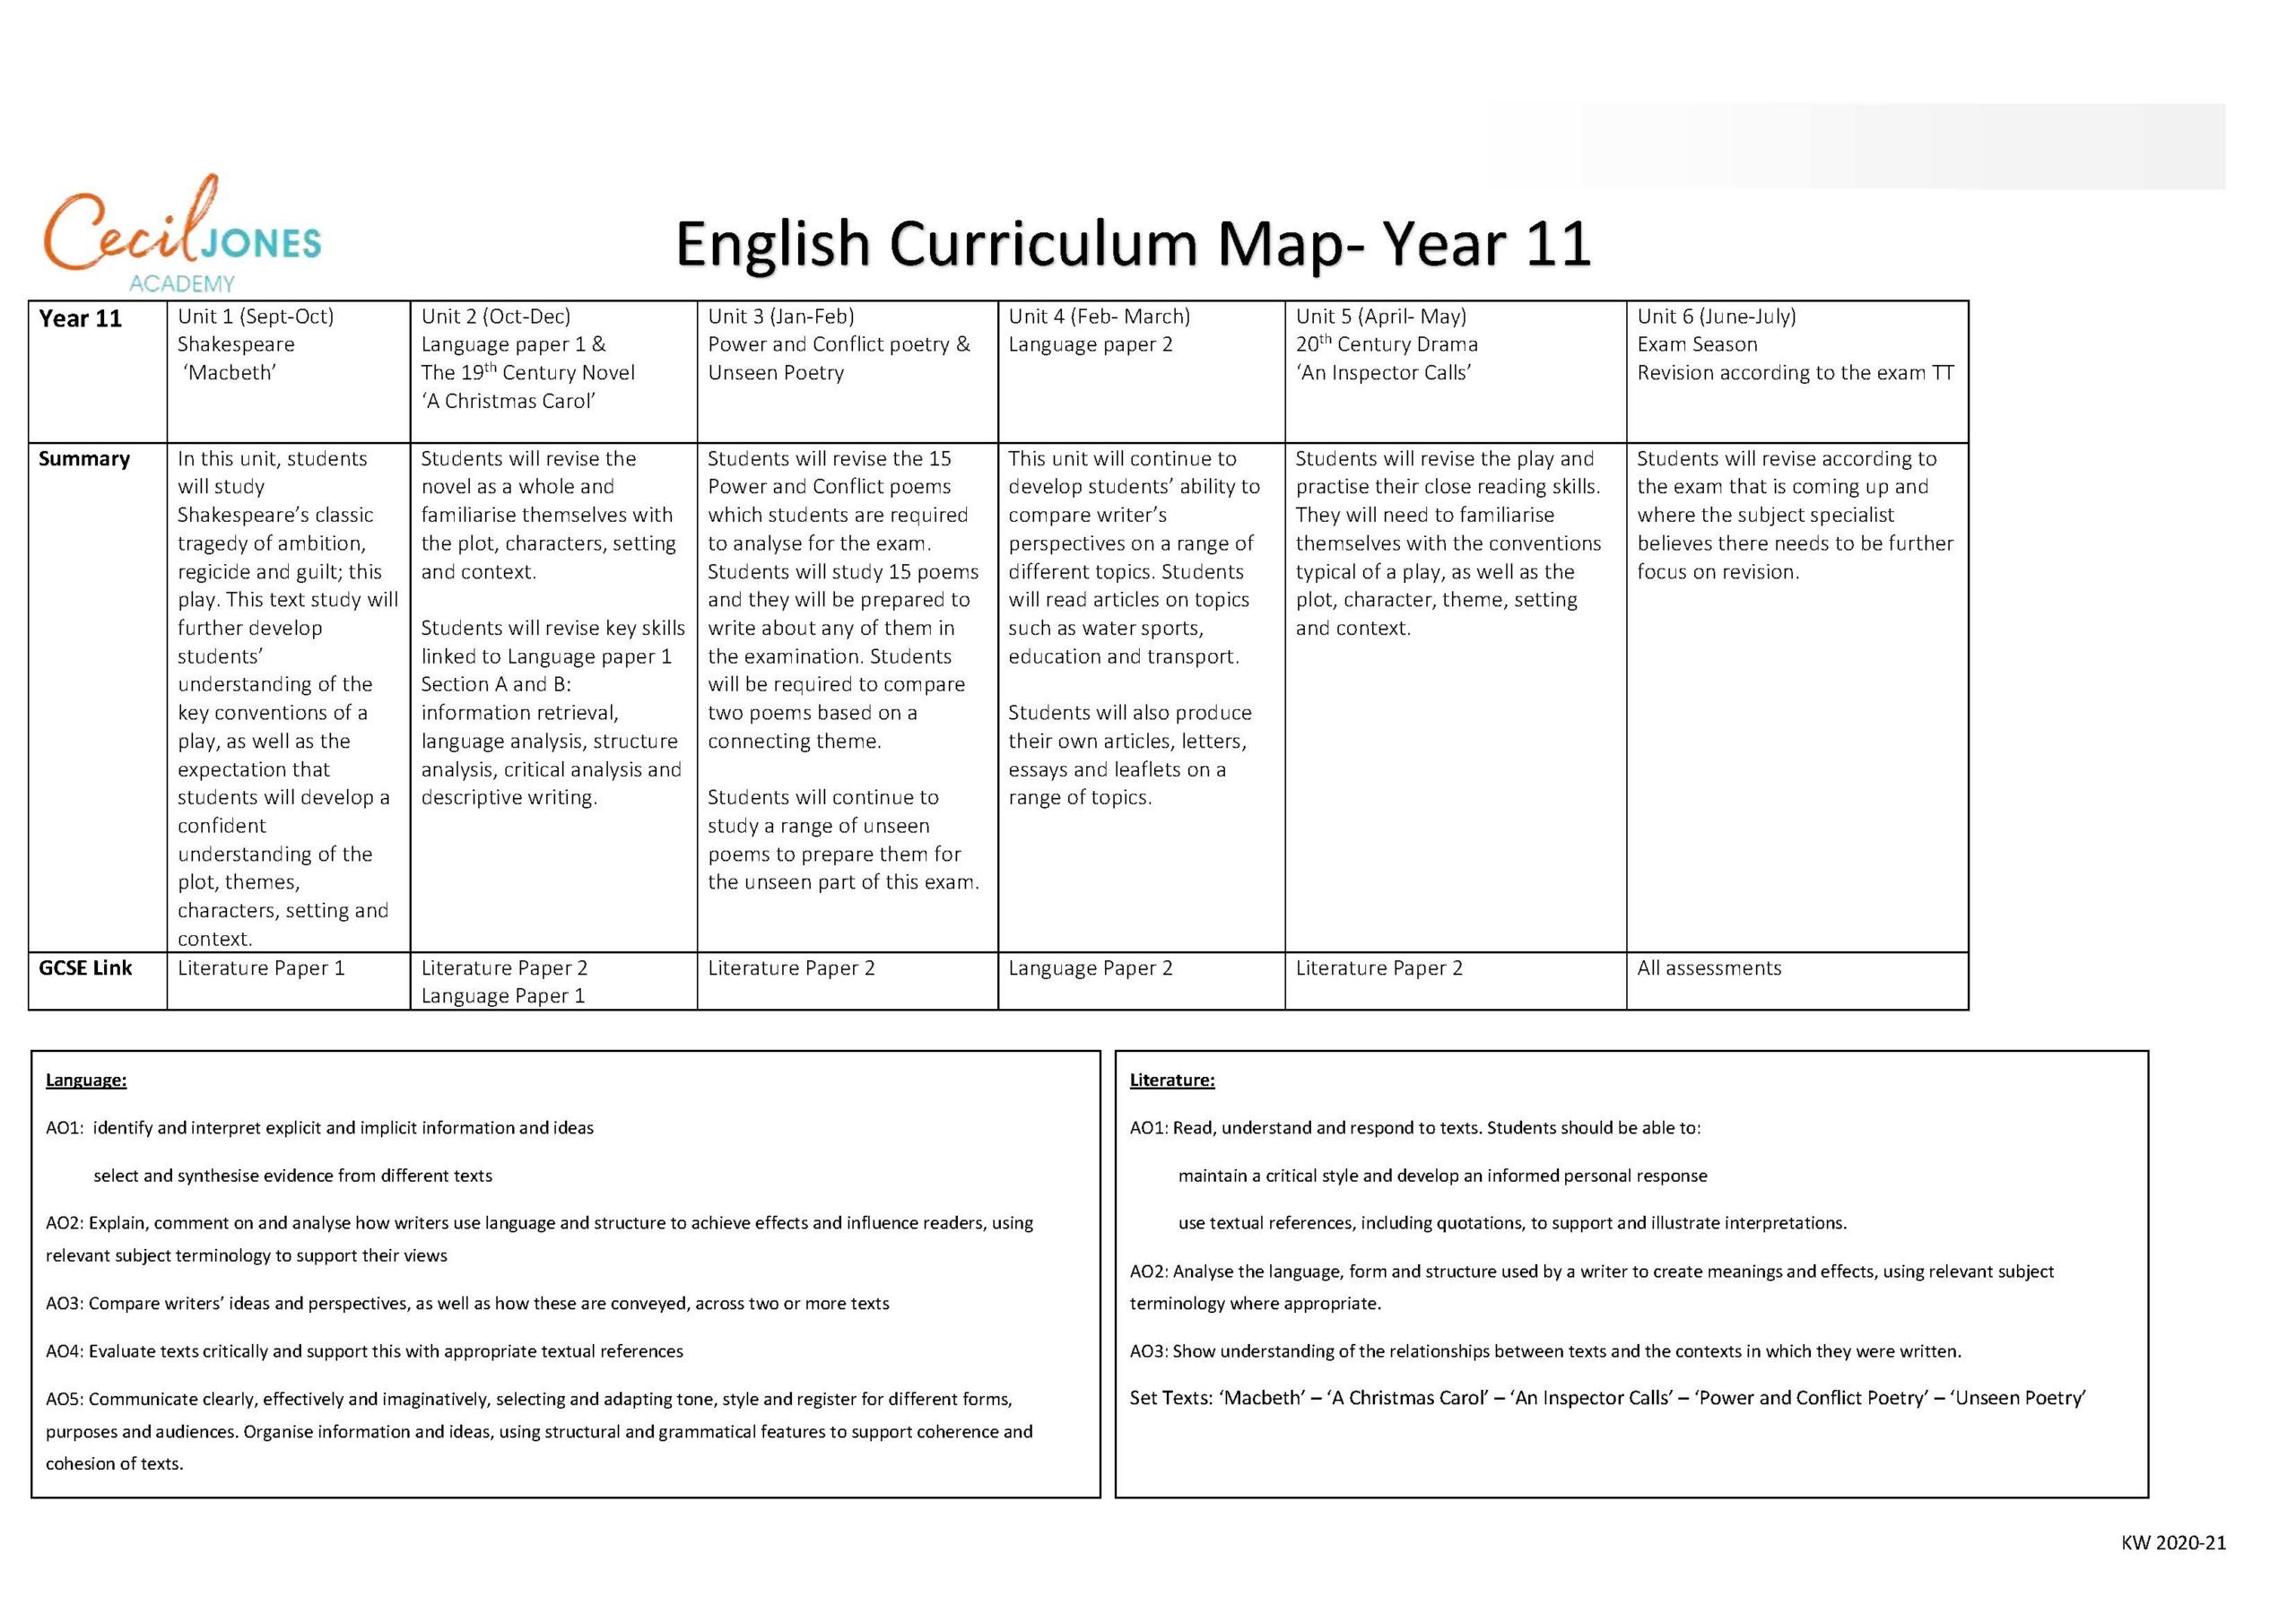 Curriculum Map English Year 11 scaled